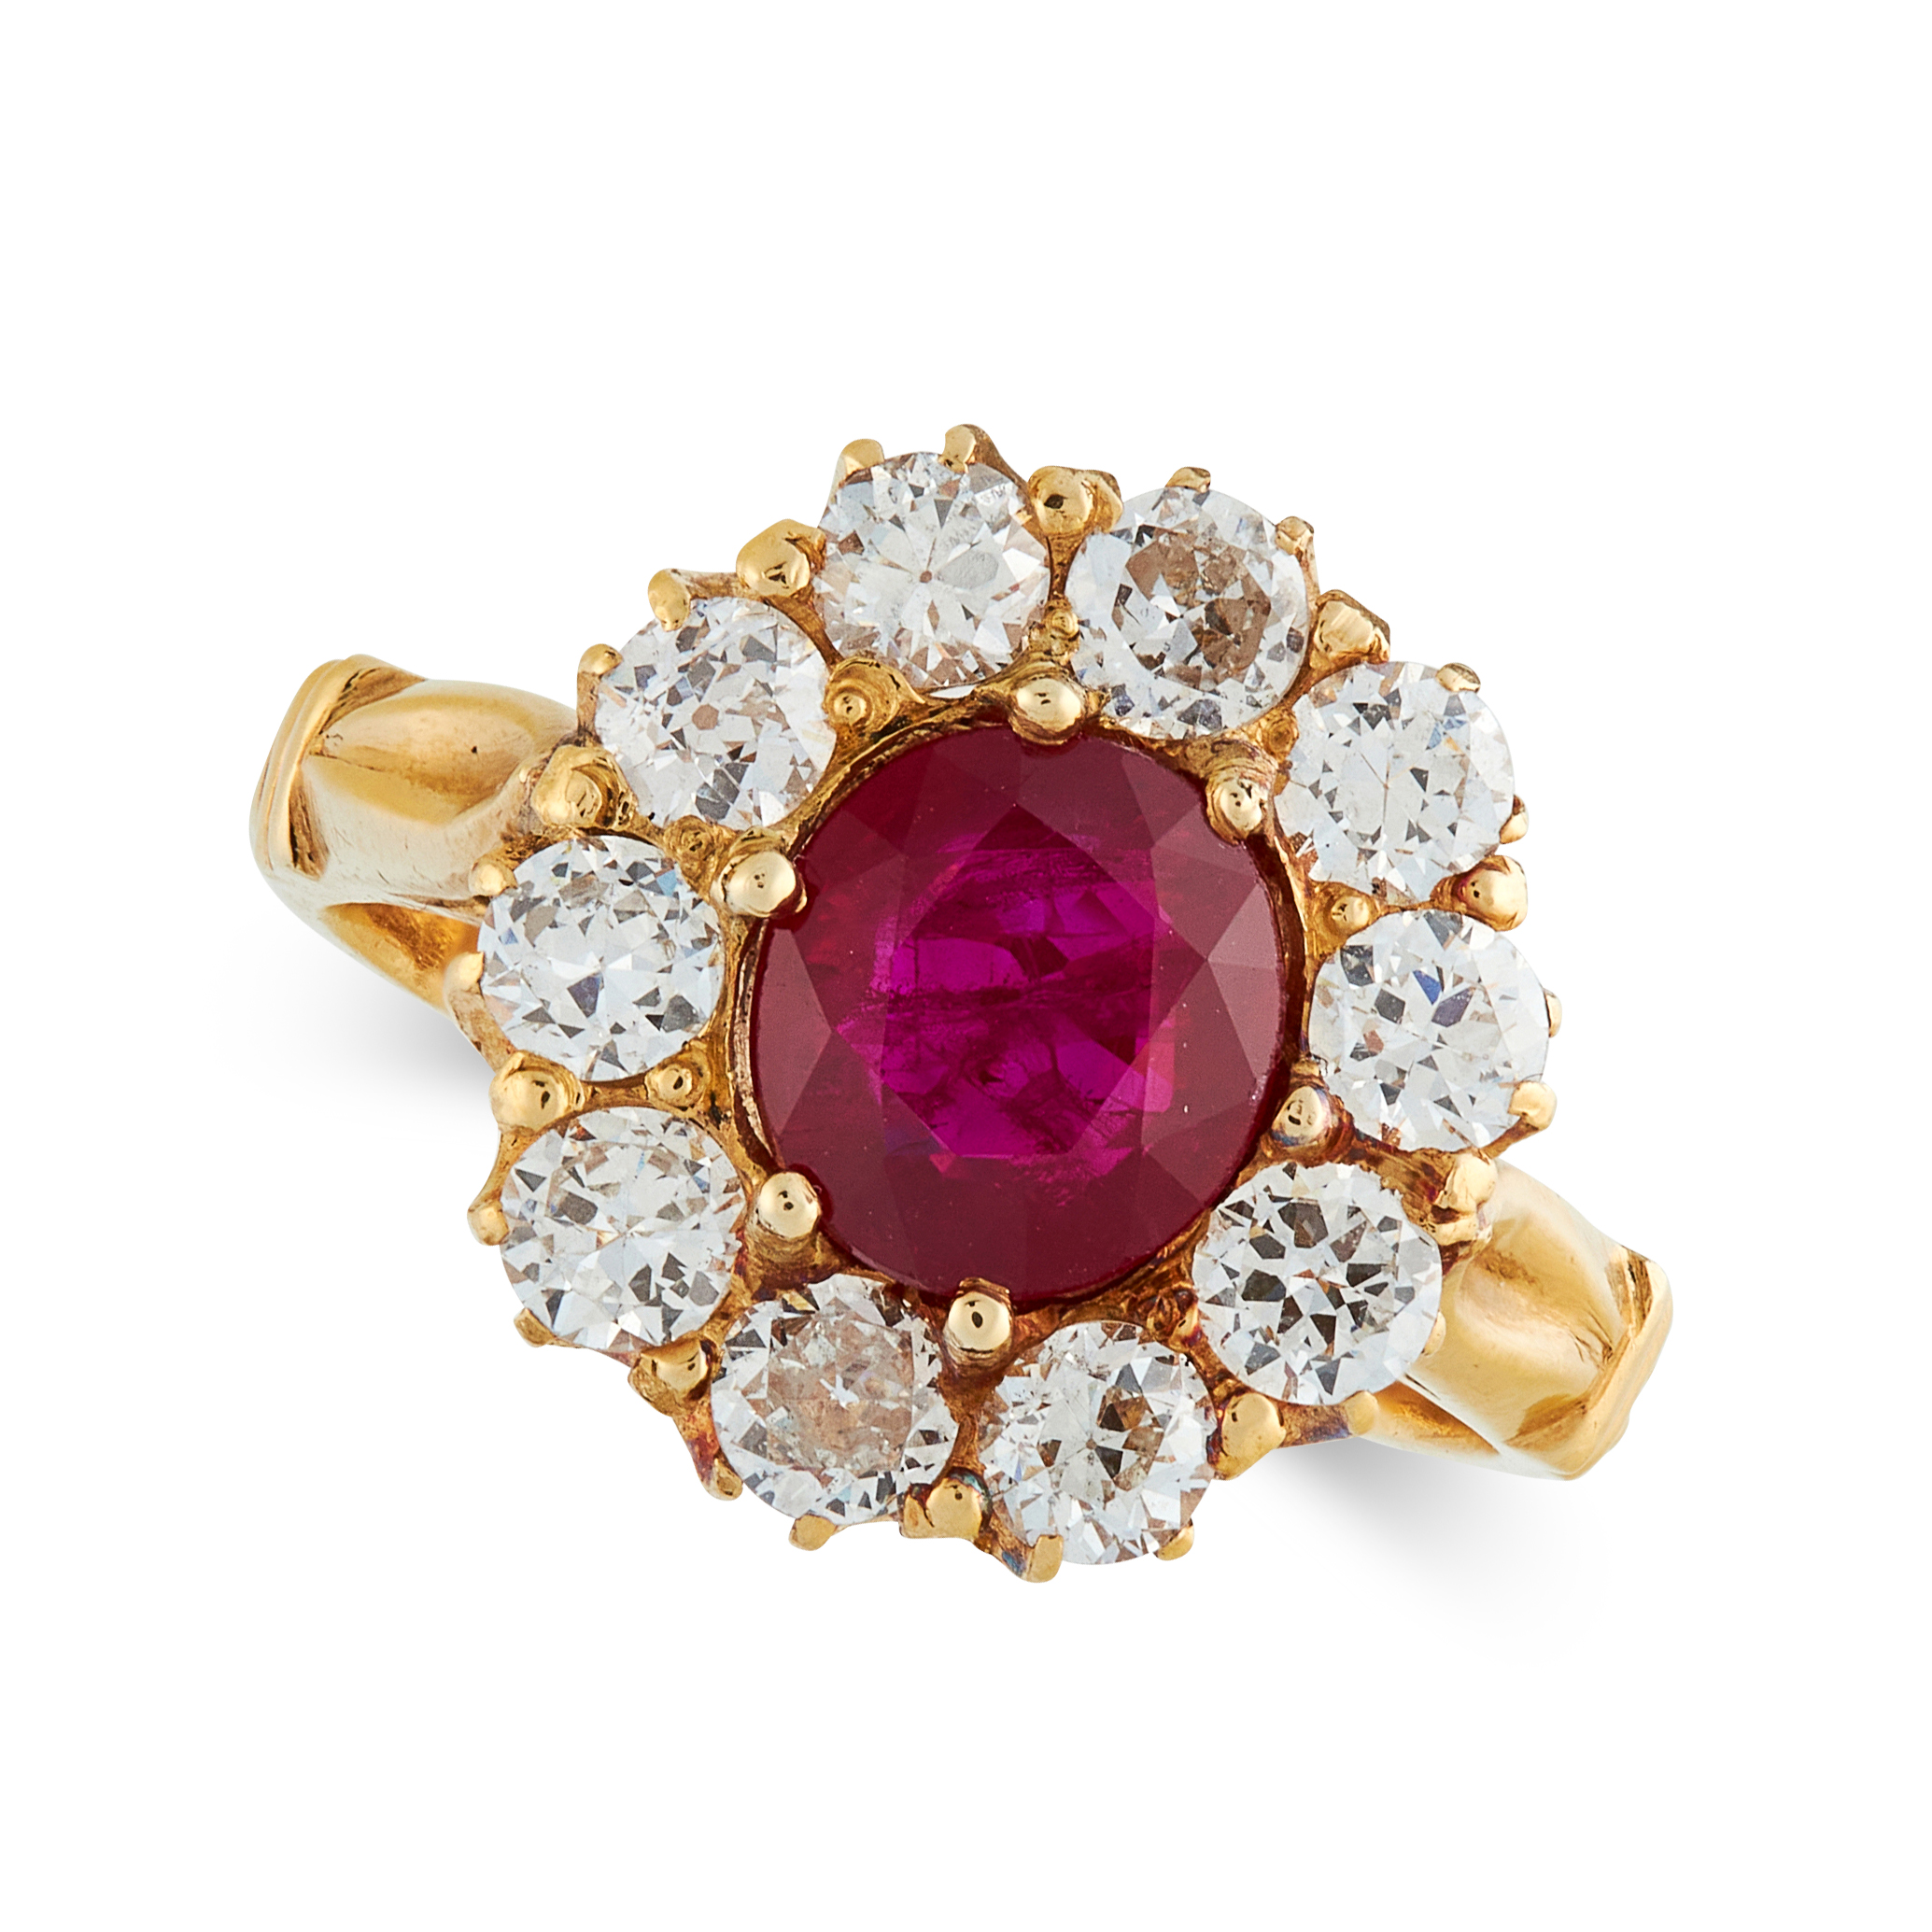 A VINTAGE RUBY AND DIAMOND DRESS RING, TIFFANY & CO in 18ct yellow gold, set with a cushion cut ruby